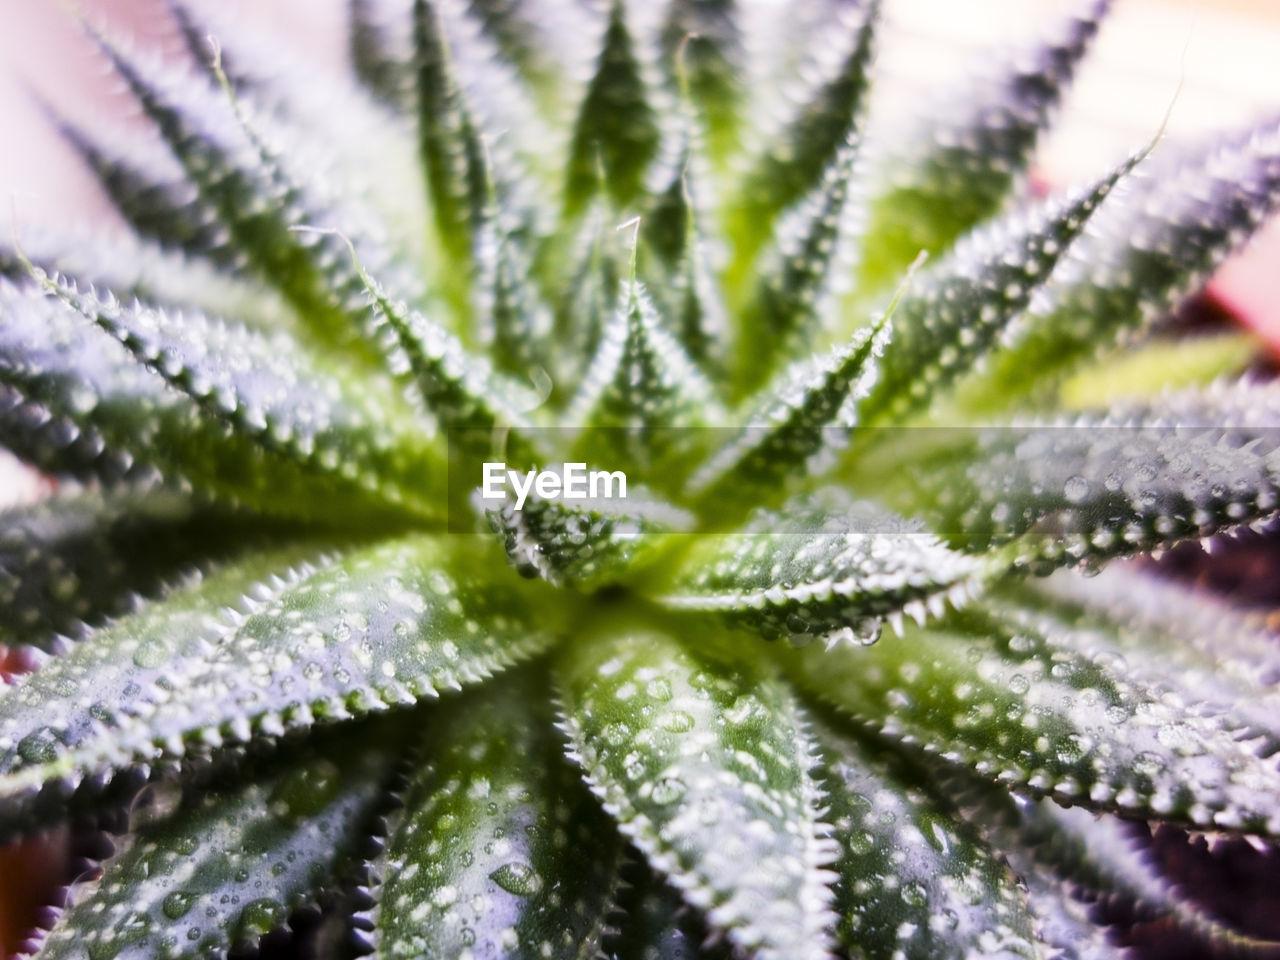 FULL FRAME SHOT OF WATER DROPS ON PLANTS